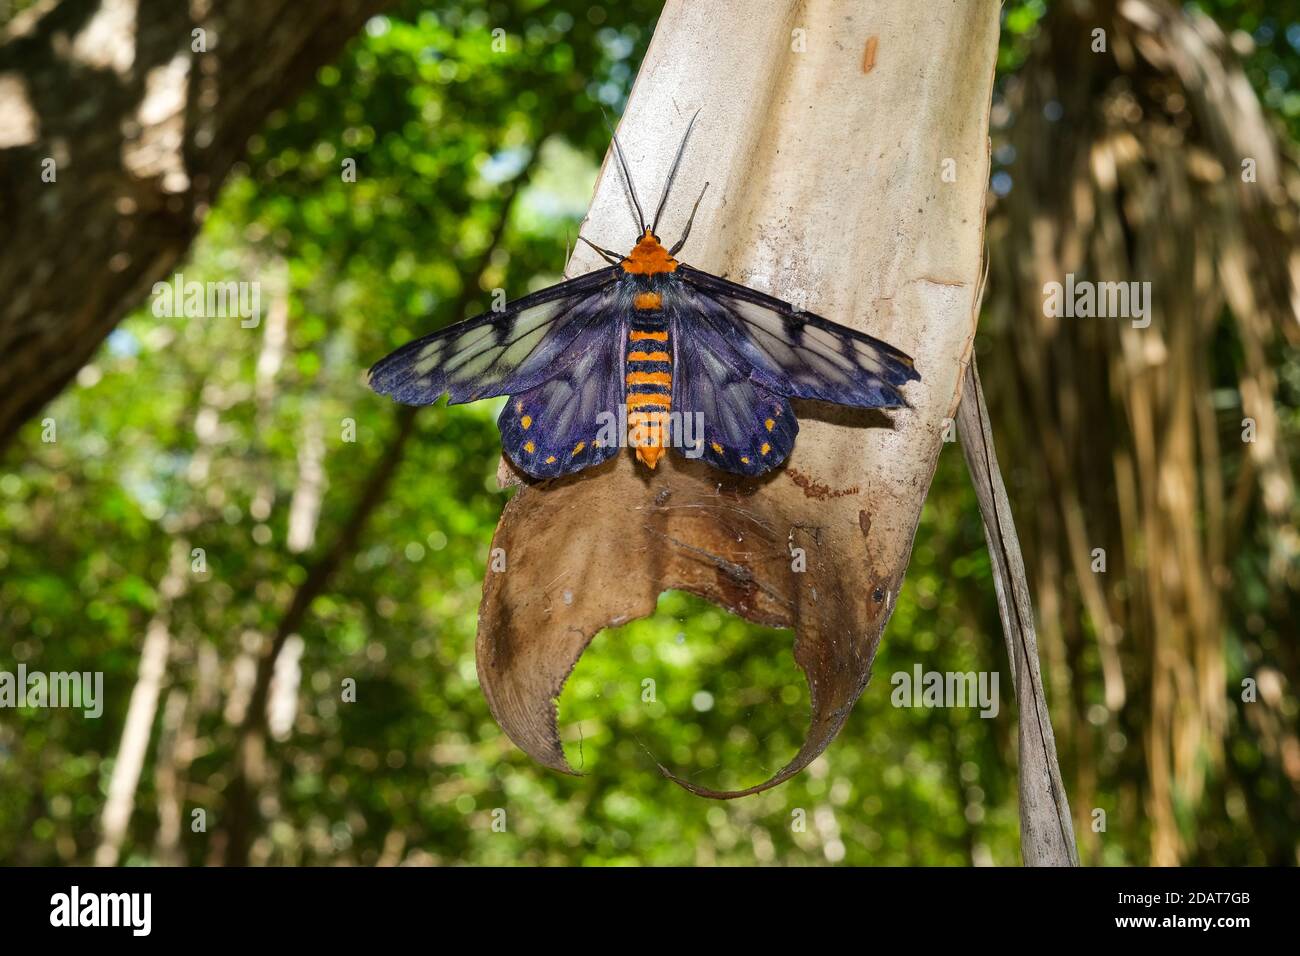 Dysphania fenestrata, also known as Dysphania numana or The Four O'clock Moth, in natural habitat in Darwin in the Northern Territory, Australia Stock Photo